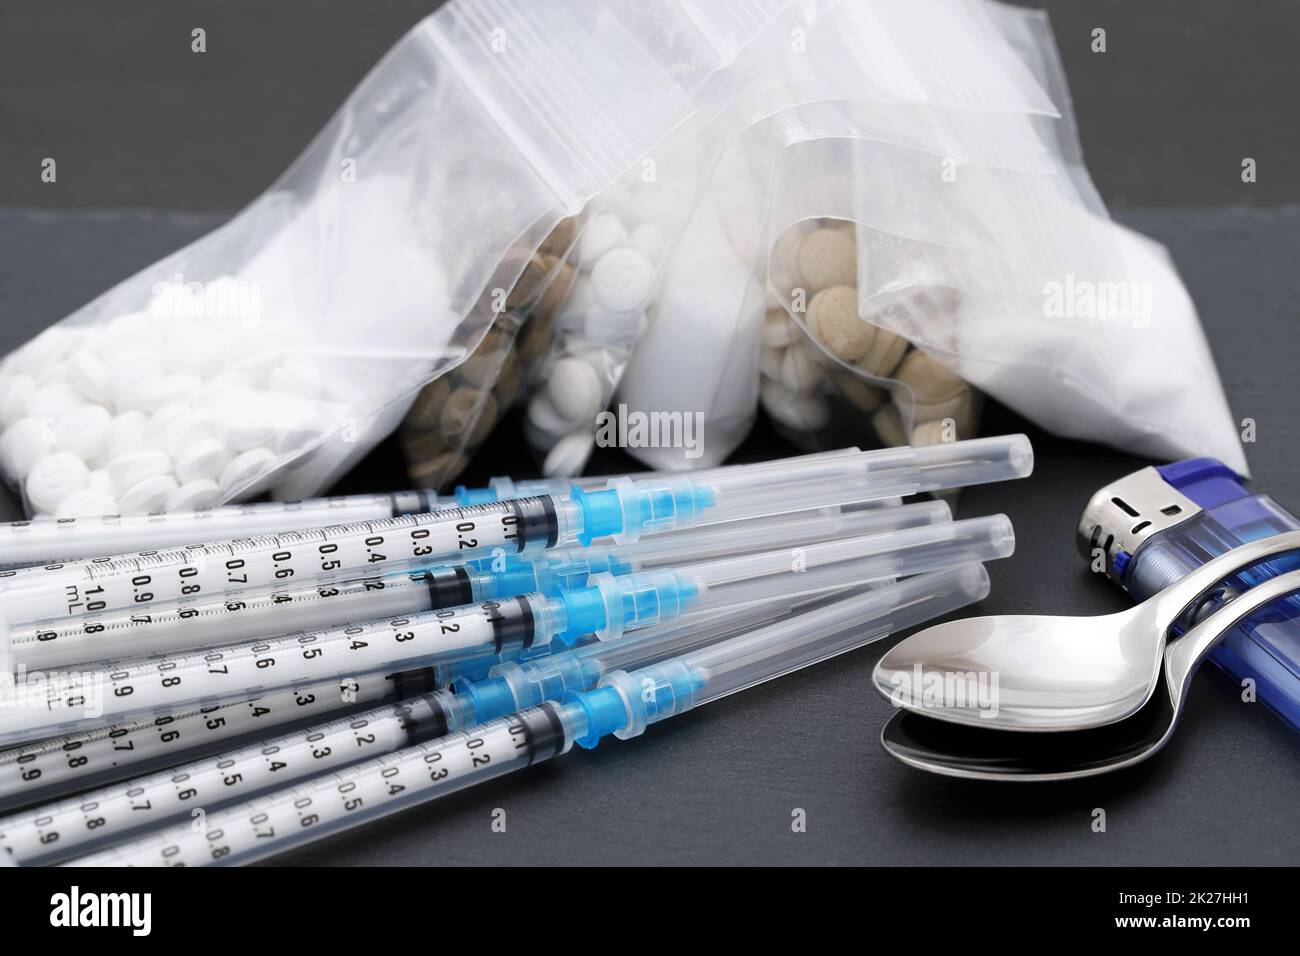 Drug injection syringe and cooked heroin in a bag on black table Stock Photo